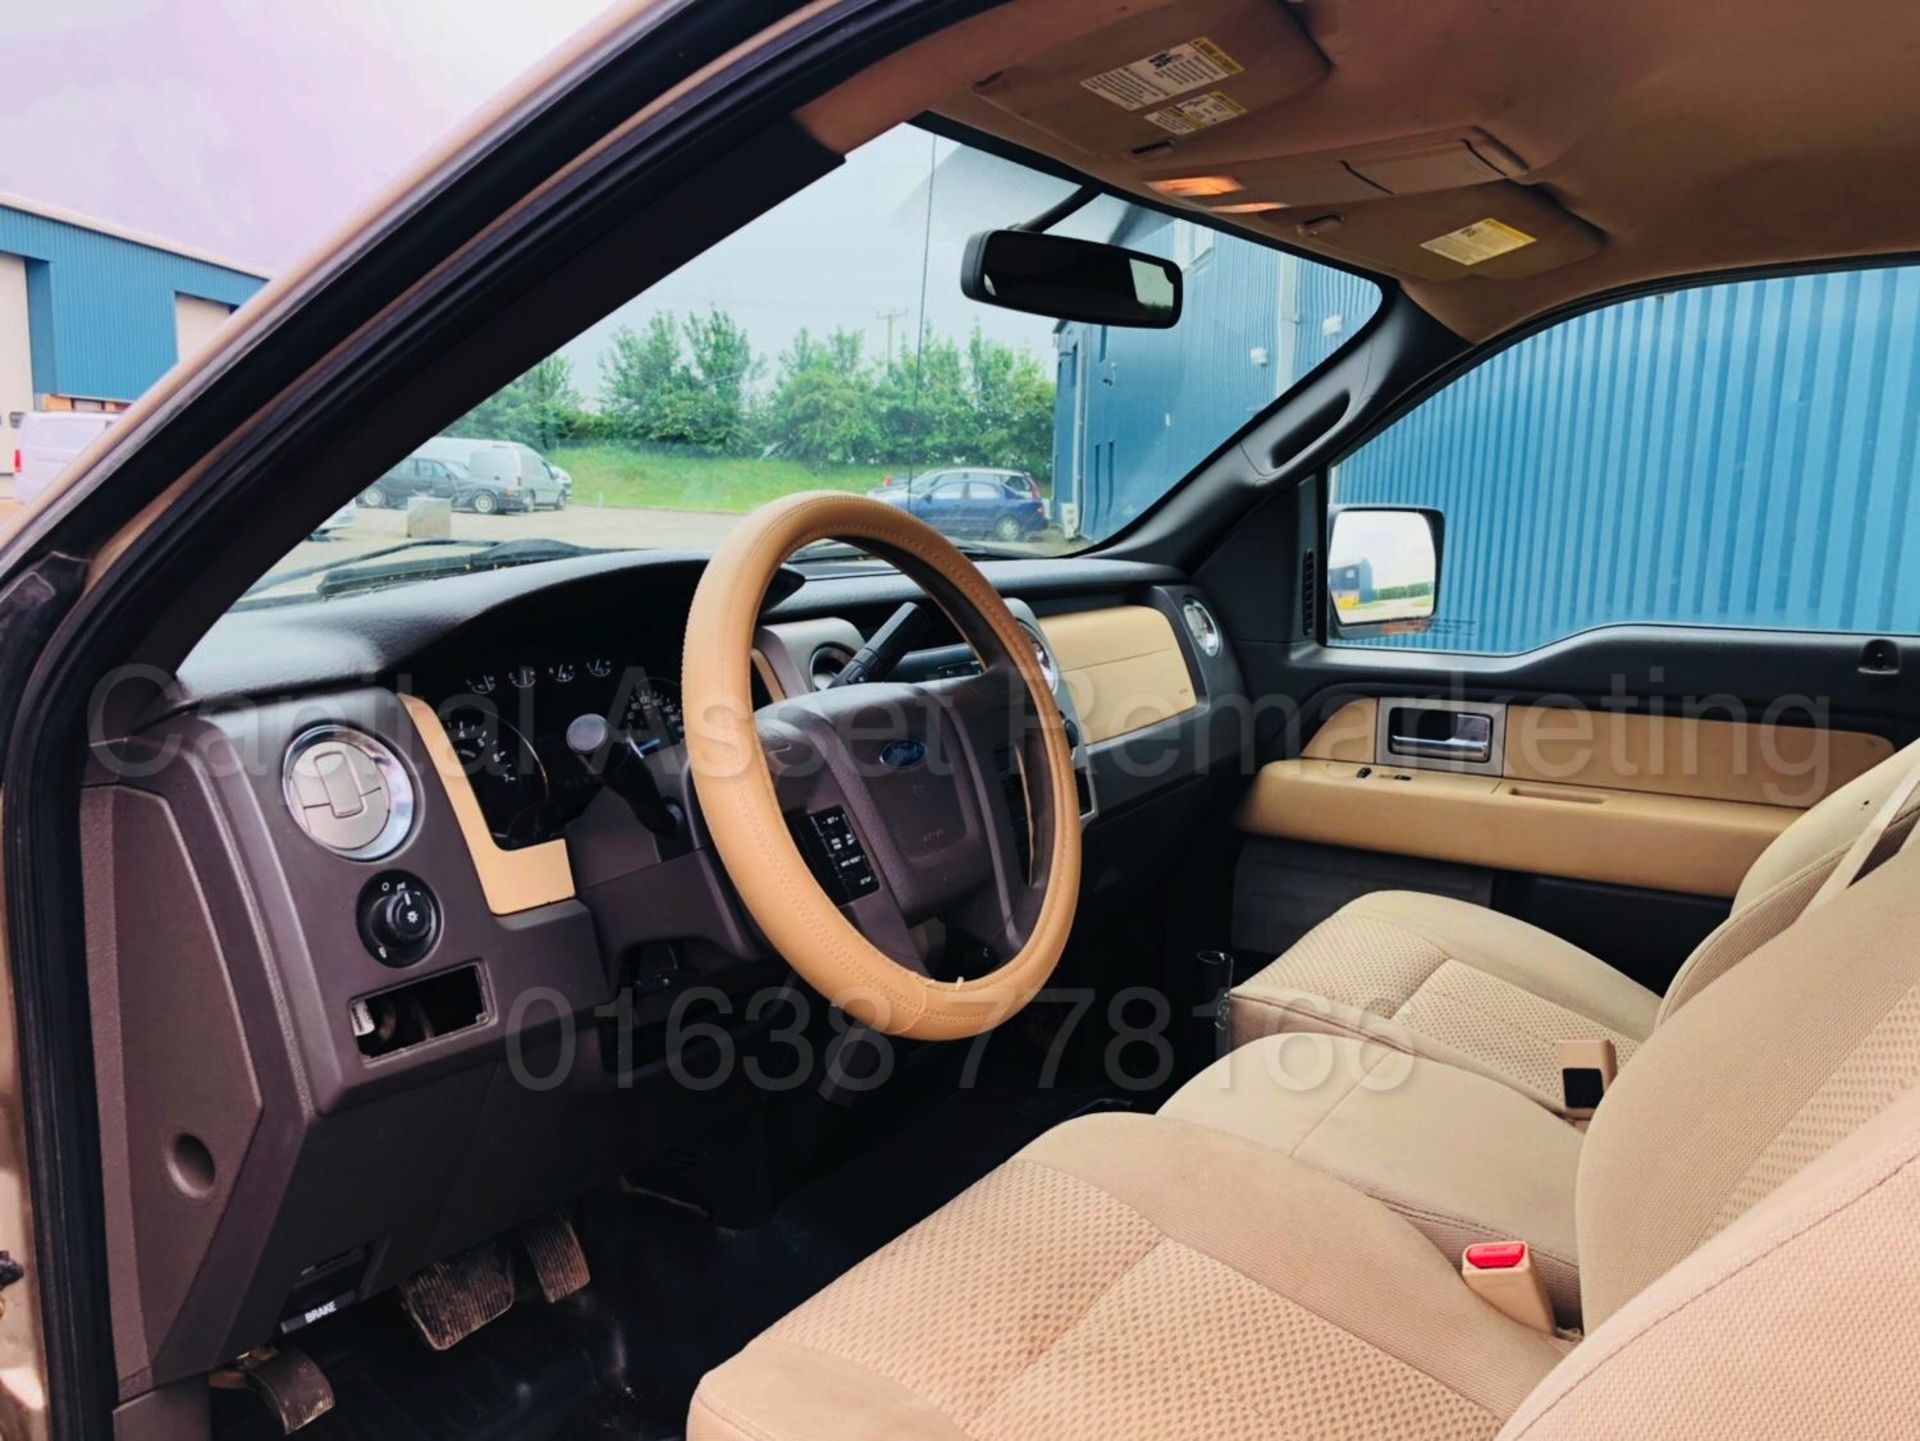 (ON SALE) FORD F-150 'XLT EDITION' KING CAB (2012 MODEL) '5.0 V8 - COLUM GEARBOX' **MASSIVE SPEC** - Image 21 of 33